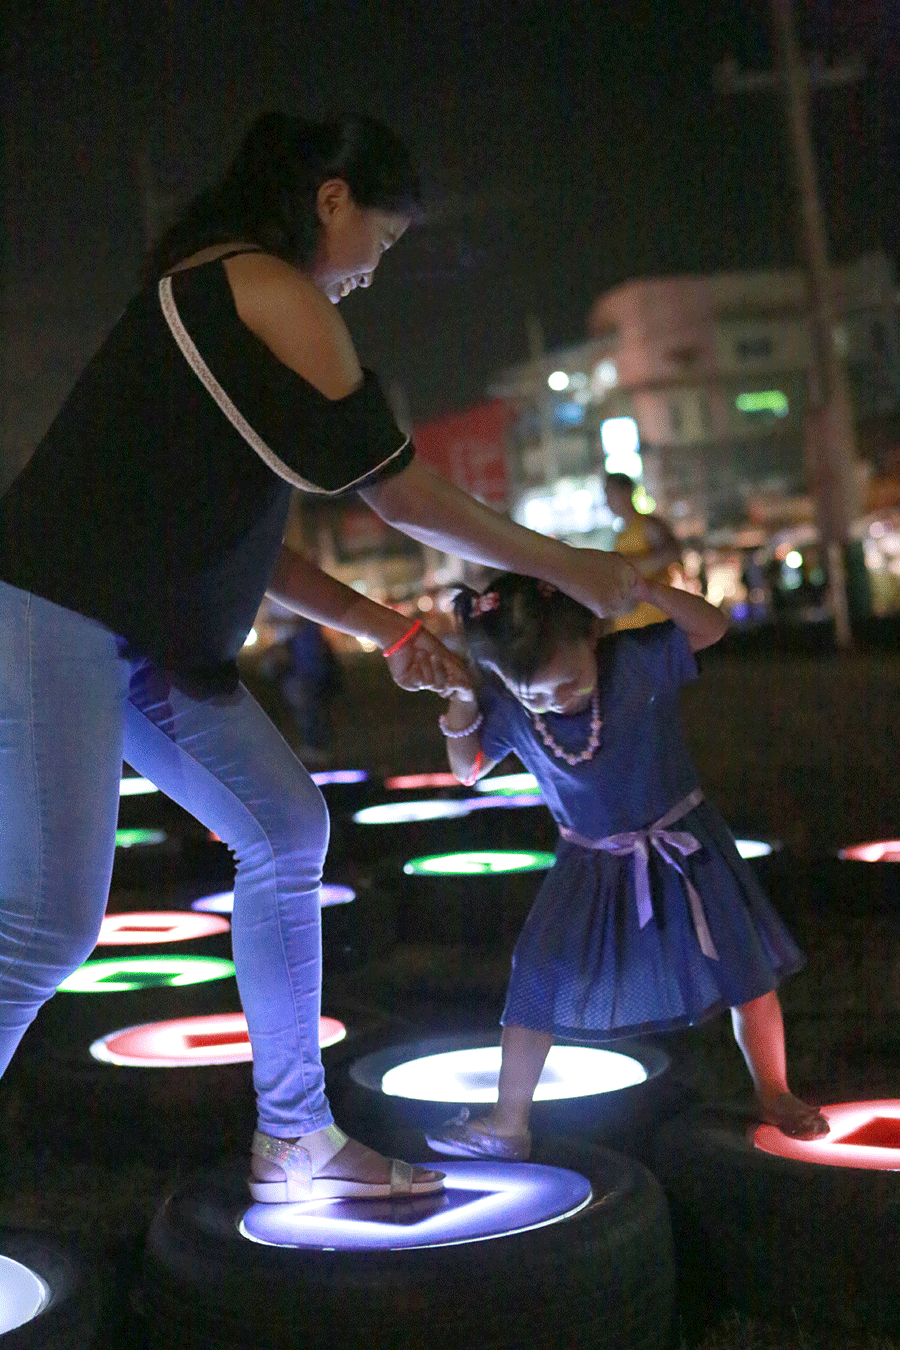 Mother and child play at the public solar light art installation in SM City Marilao. The installation conveys the message of sustainability in an engaging way through delightful light and designs featuring recycled tires and solar powered light- emitting diode or LED lights.